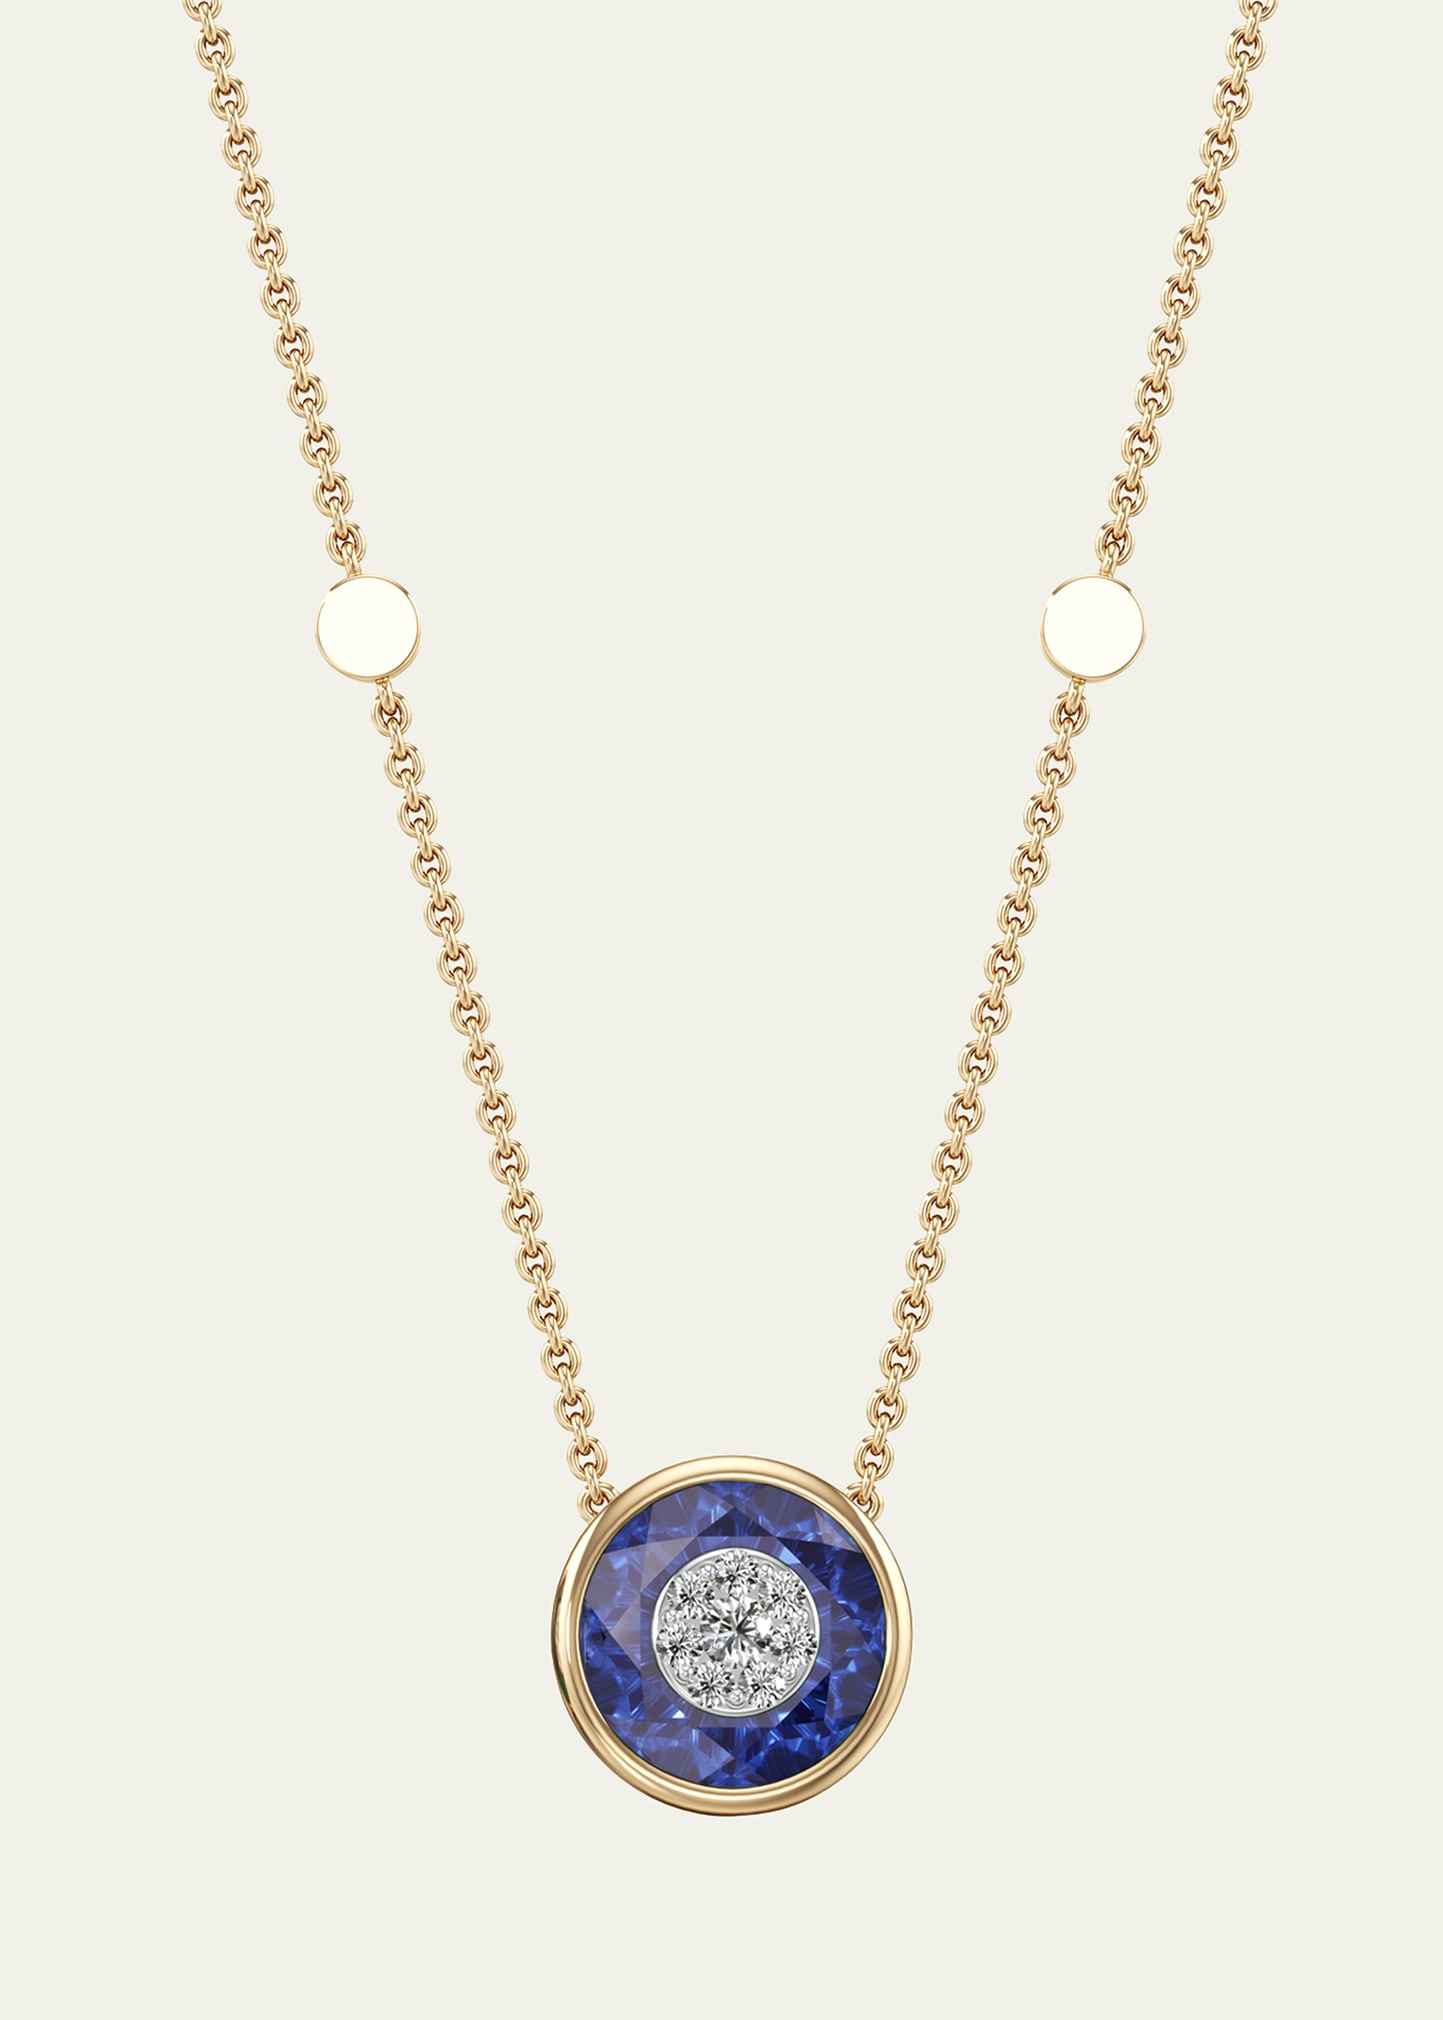 One Collection 10mm Pendant Necklace with Yellow Gold Bezel, Sapphire